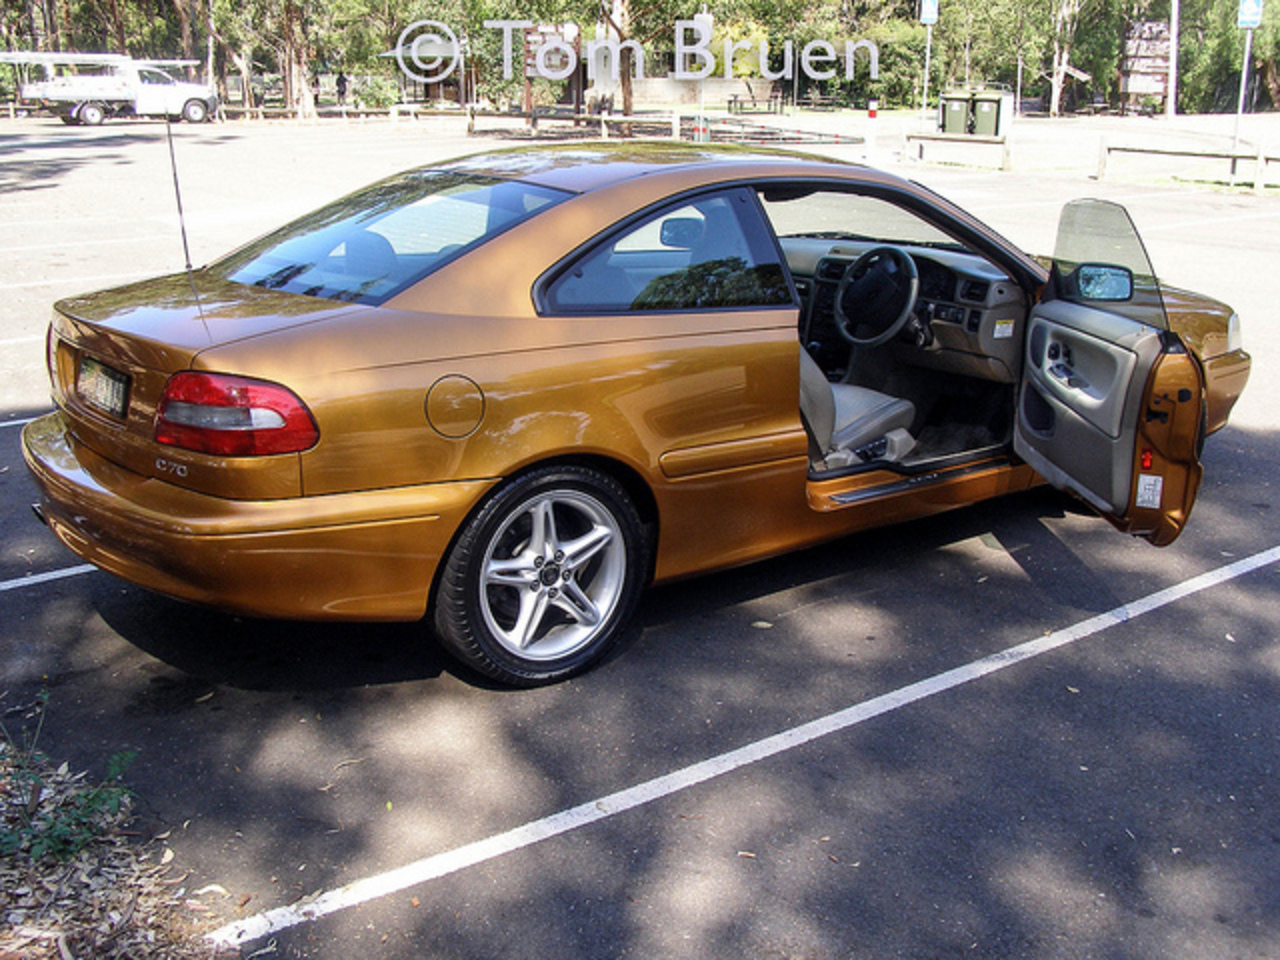 0001 1999 Volvo C70 Coupe 20-3-2008.jpg | Flickr - Photo Sharing!